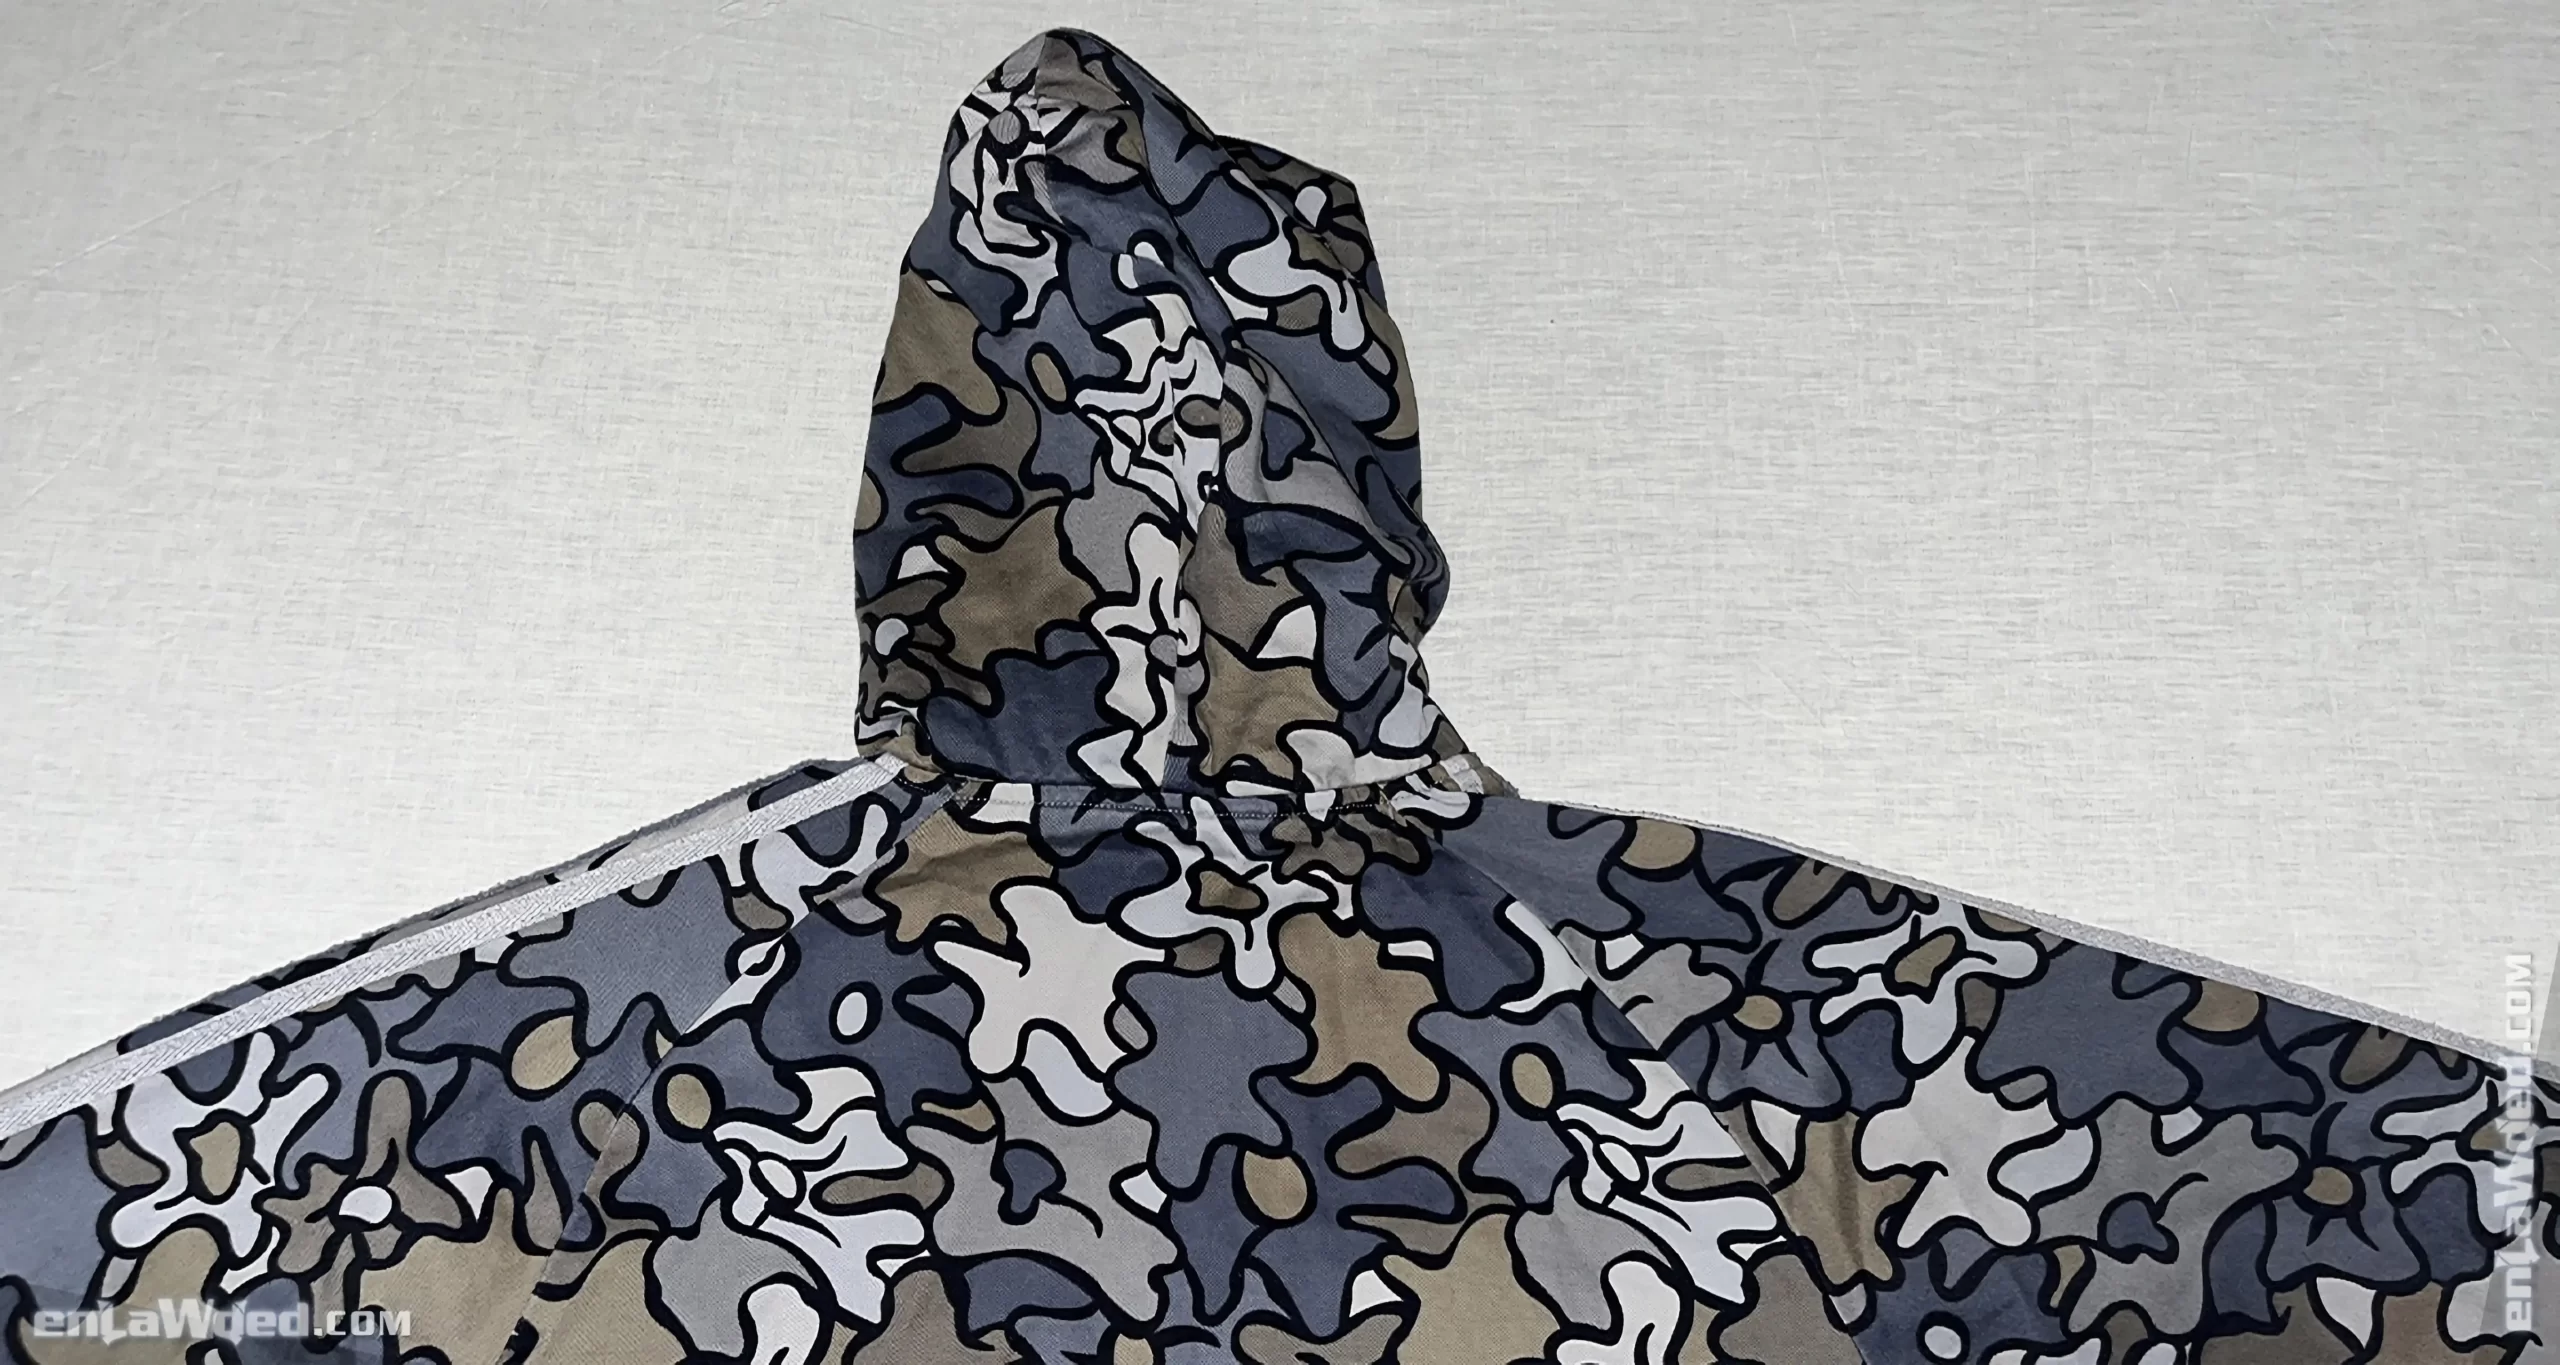 Men’s 2008 Adidas Originals Silver Safety Camo Track Top: Improved (EnLawded.com file #lp1nkuvq1261325oiig9iqp7d)